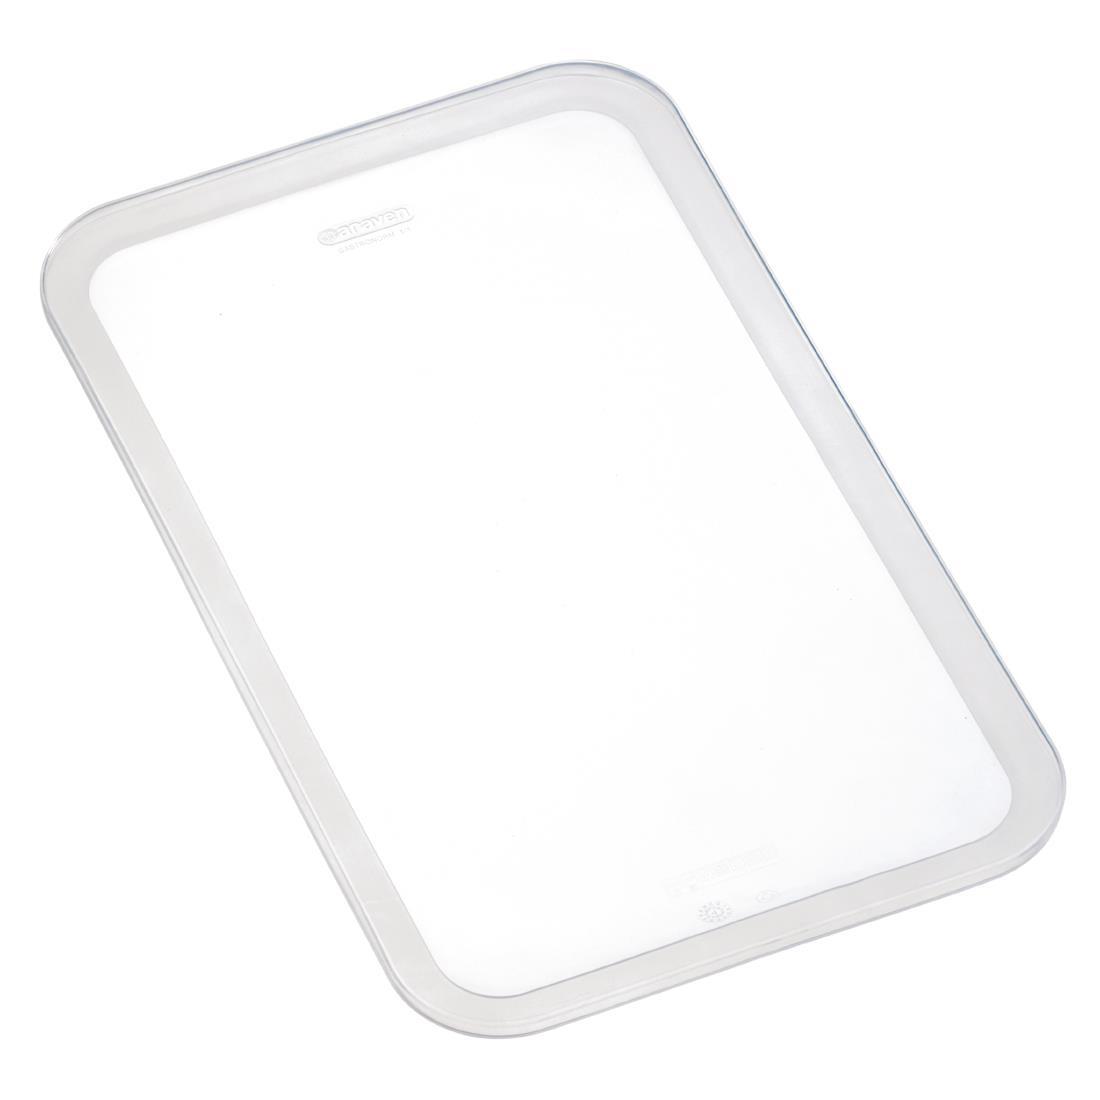 Araven Silicone 1/1 Gastronorm Lid - GG800  - 1